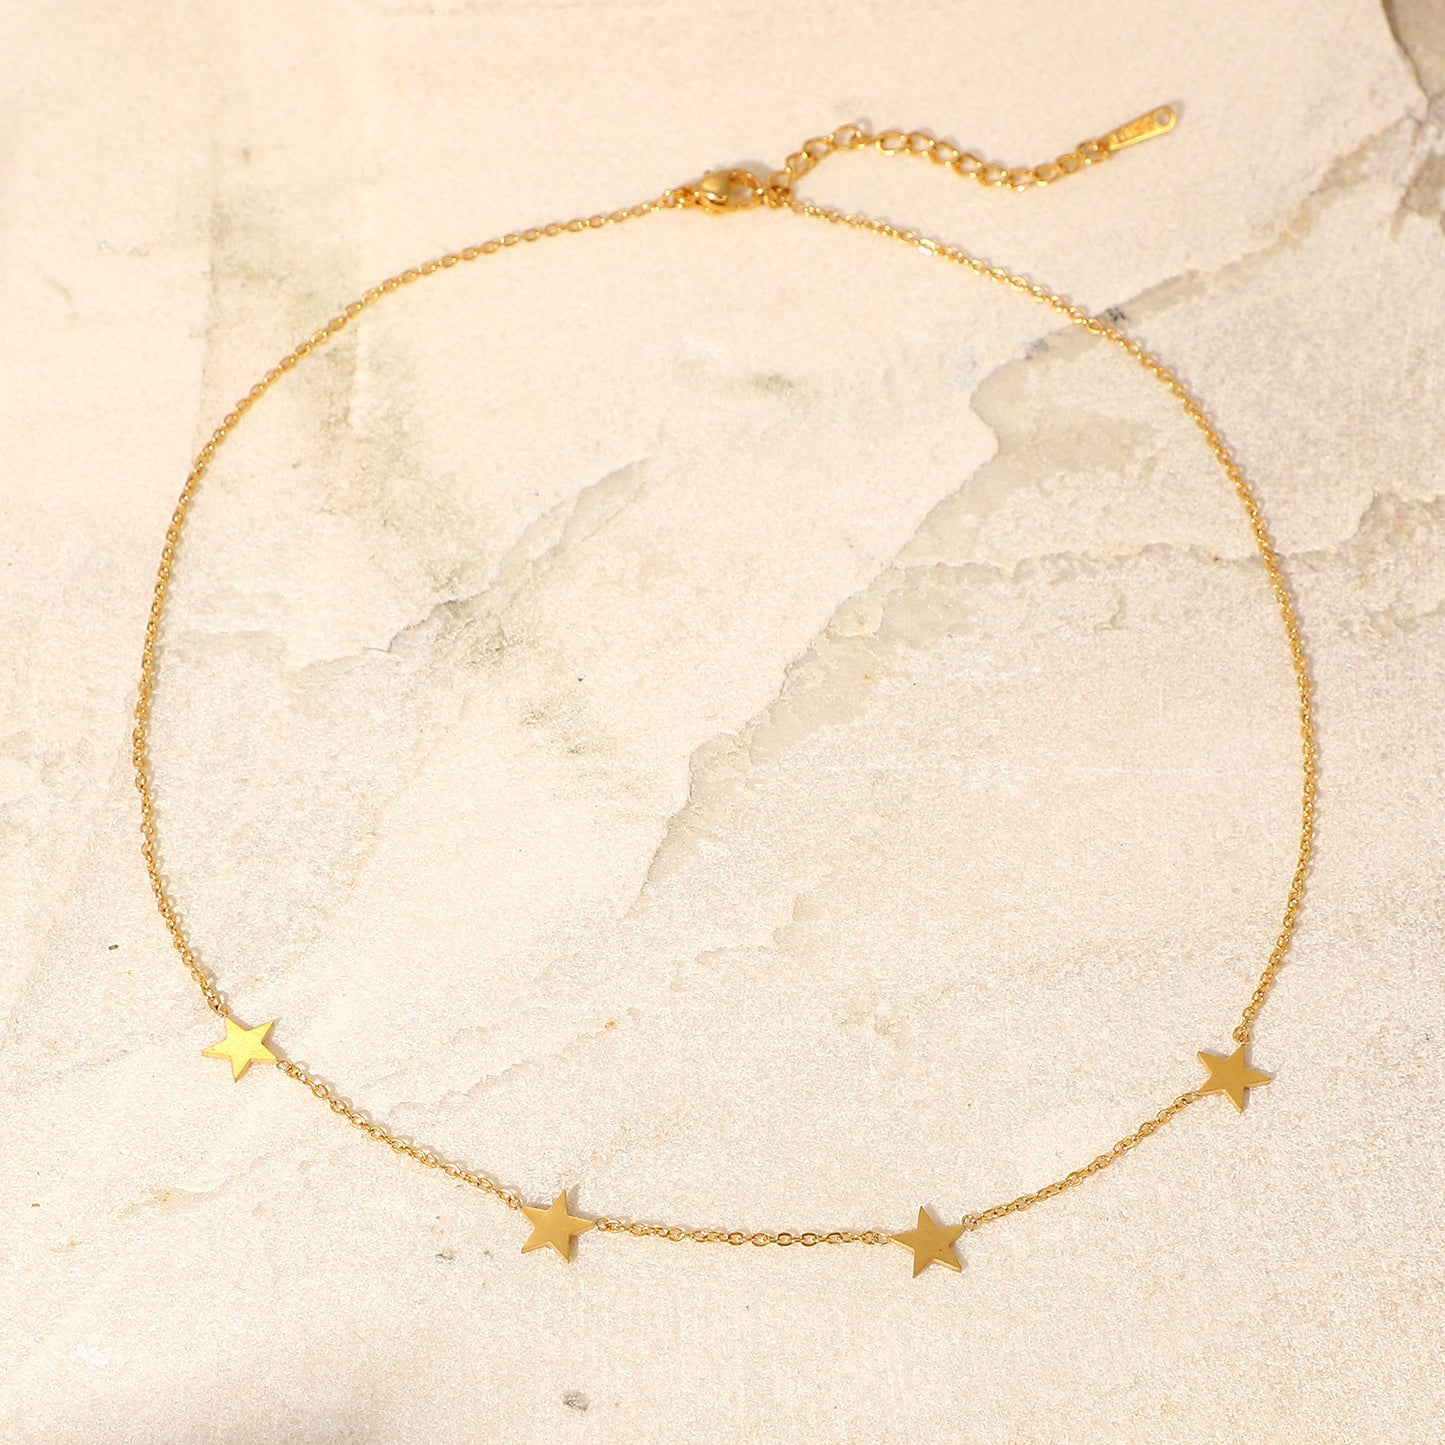 Star chain necklace